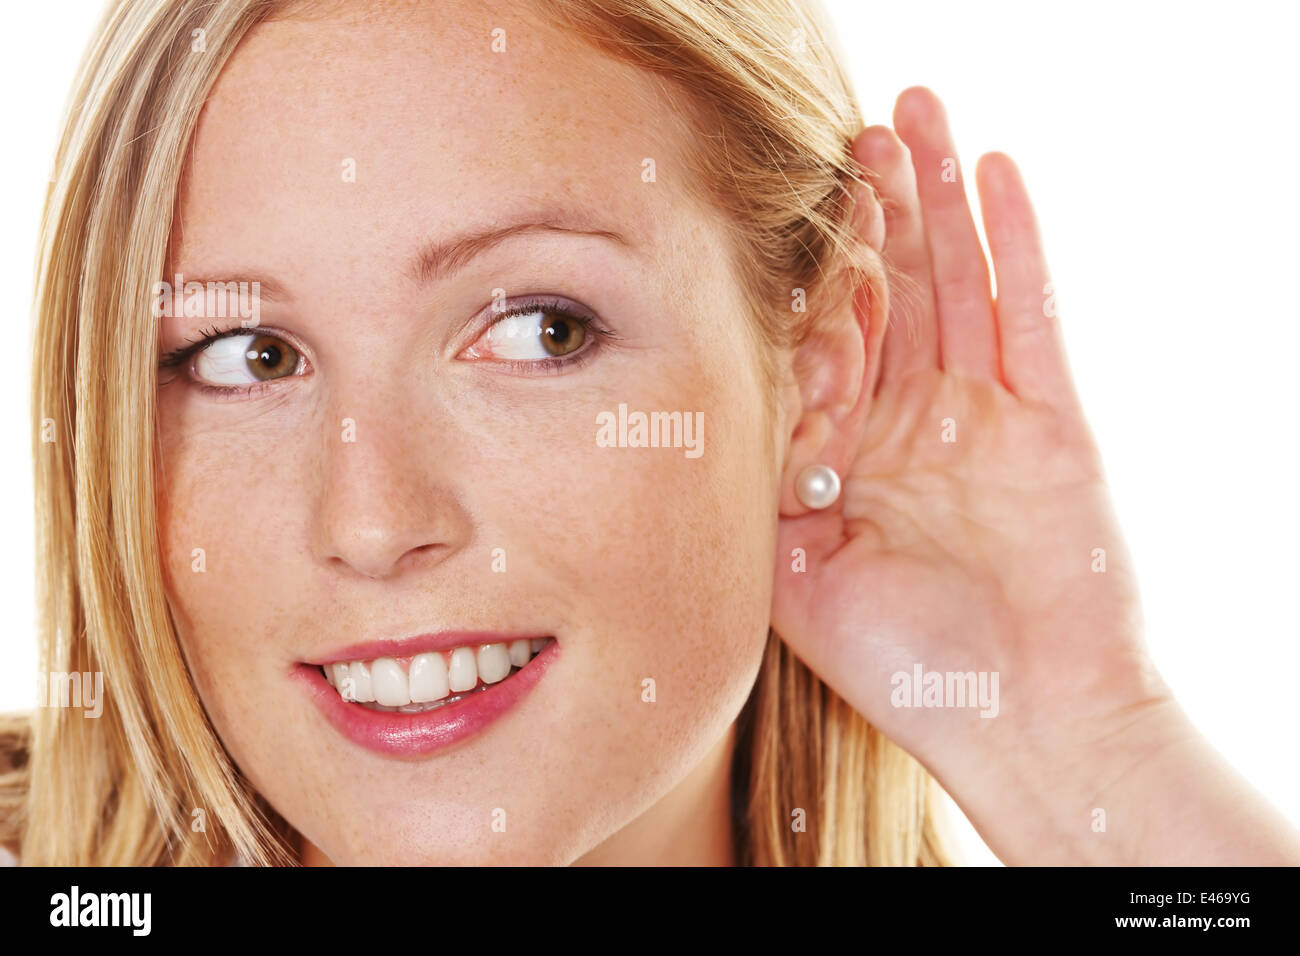 A young woman holds the hand behind the ear to listen. Stock Photo